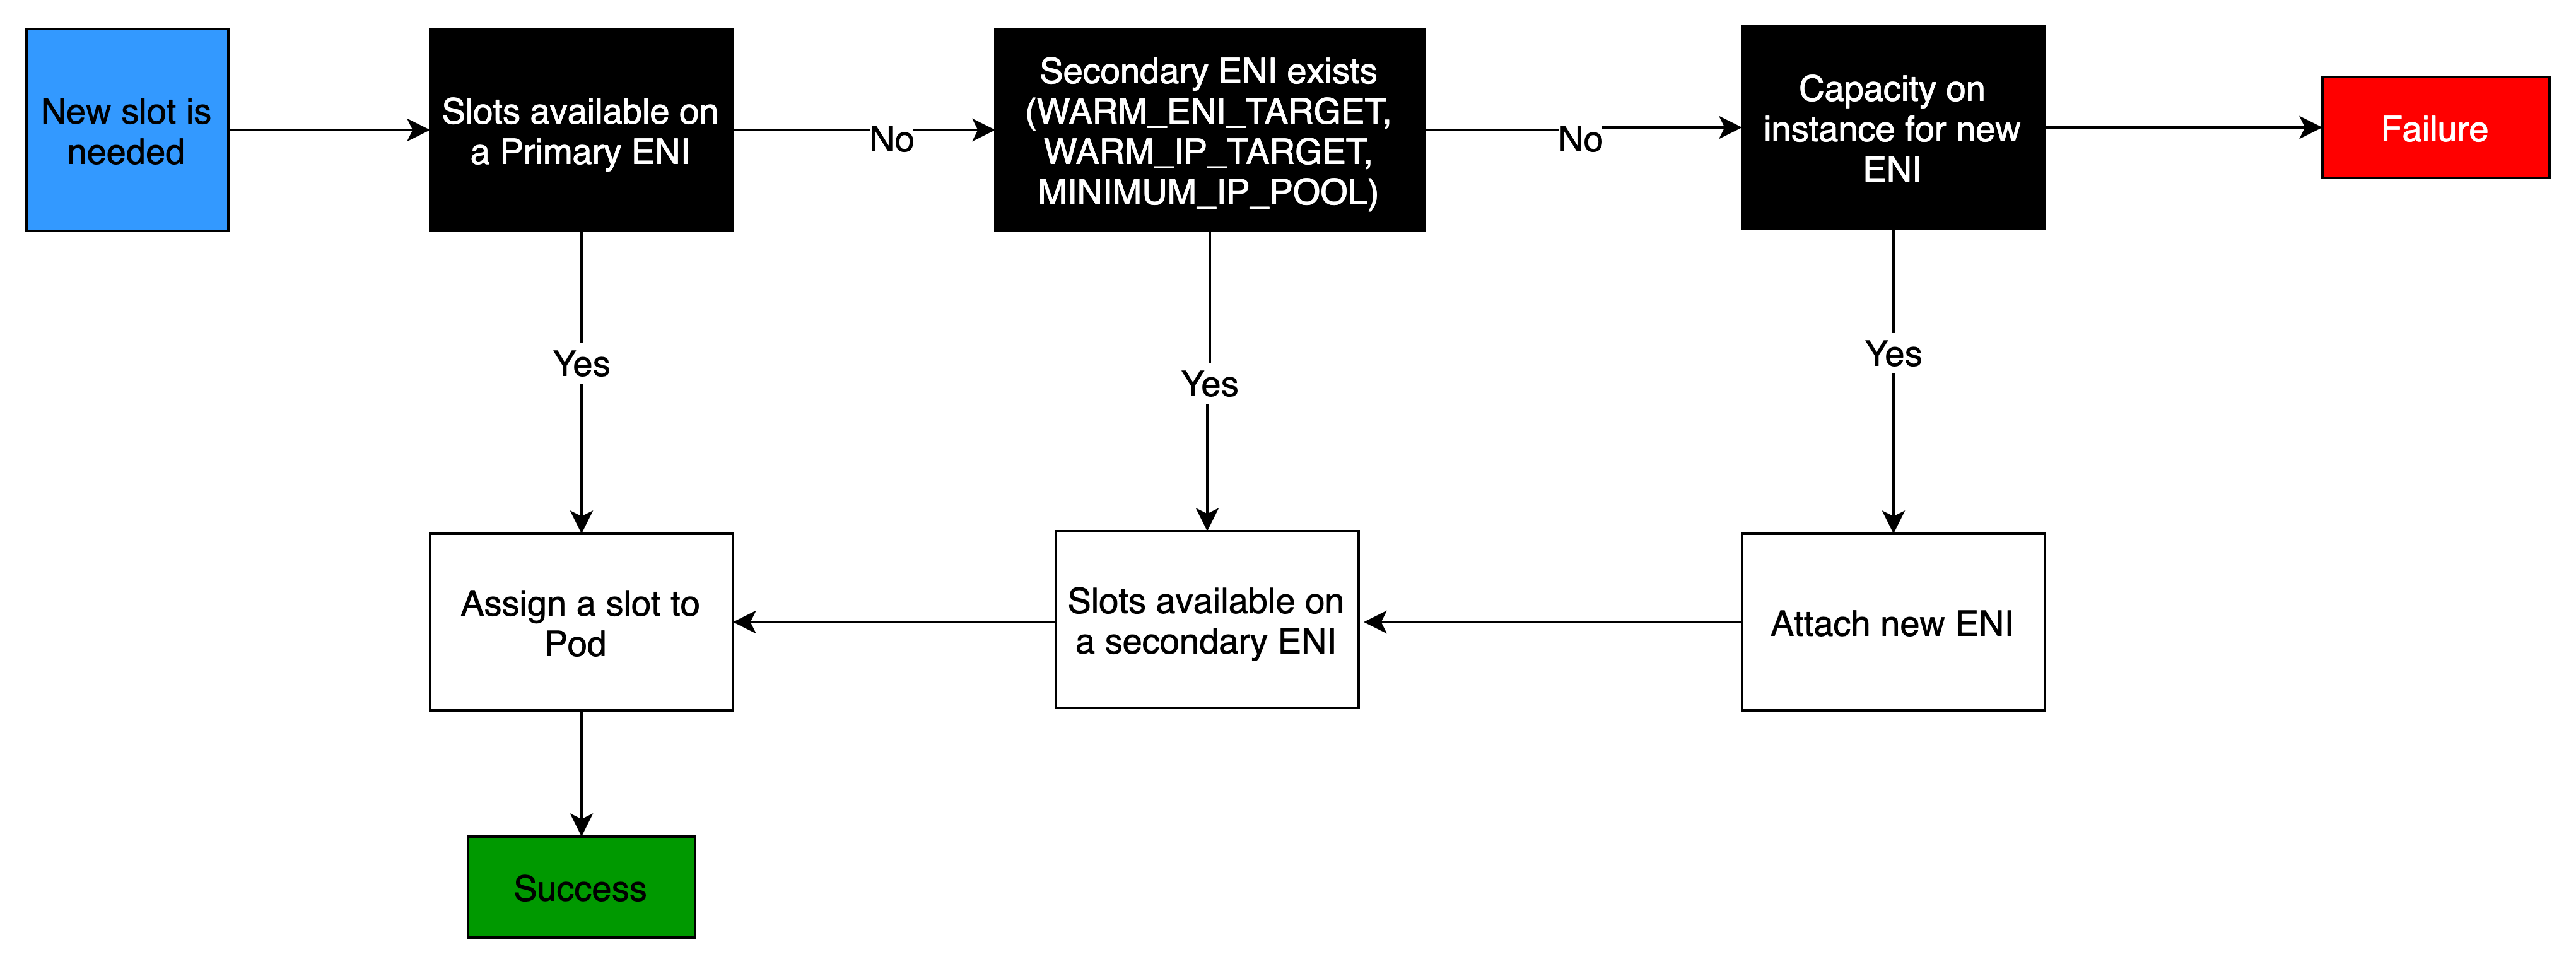 flow chart illustrating procedure when new ENI delegated prefix is needed